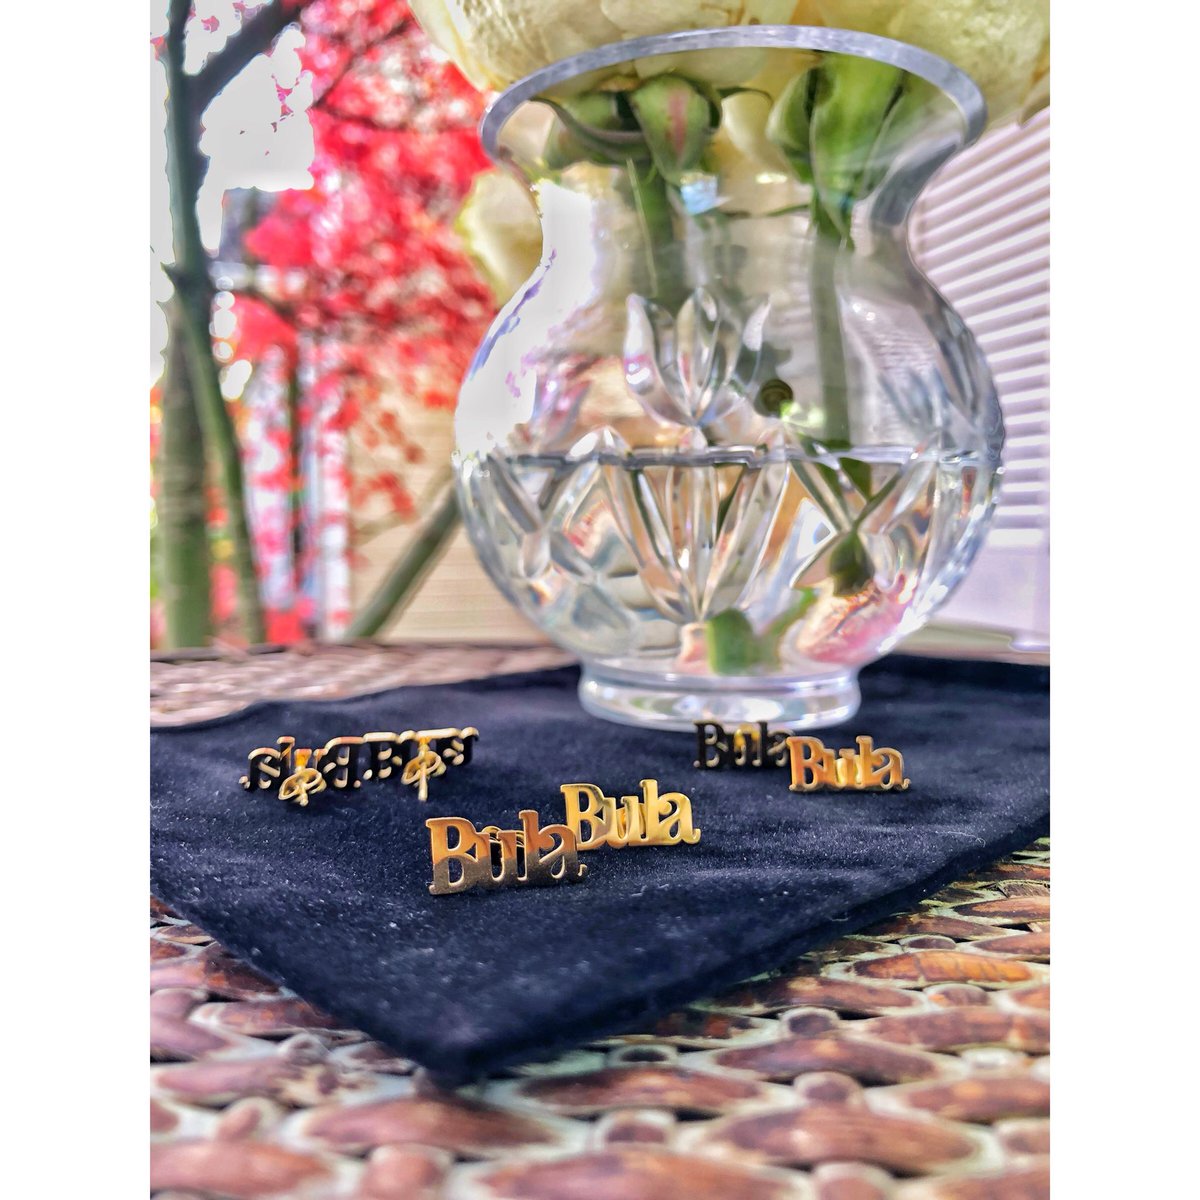 Our #Bula #earrings will make the perfect #holiday gift 🎁 you can find them on our site for only $14.99 #happyholidays2019 #holidaygifts #rugbygirls🏉 #rugbygirl #rugby #womensrugby7s #girlsruletheworld #hsbcrugby7s #usawomensrugby7s #canadarugby7s #fijiwomensrugby7s